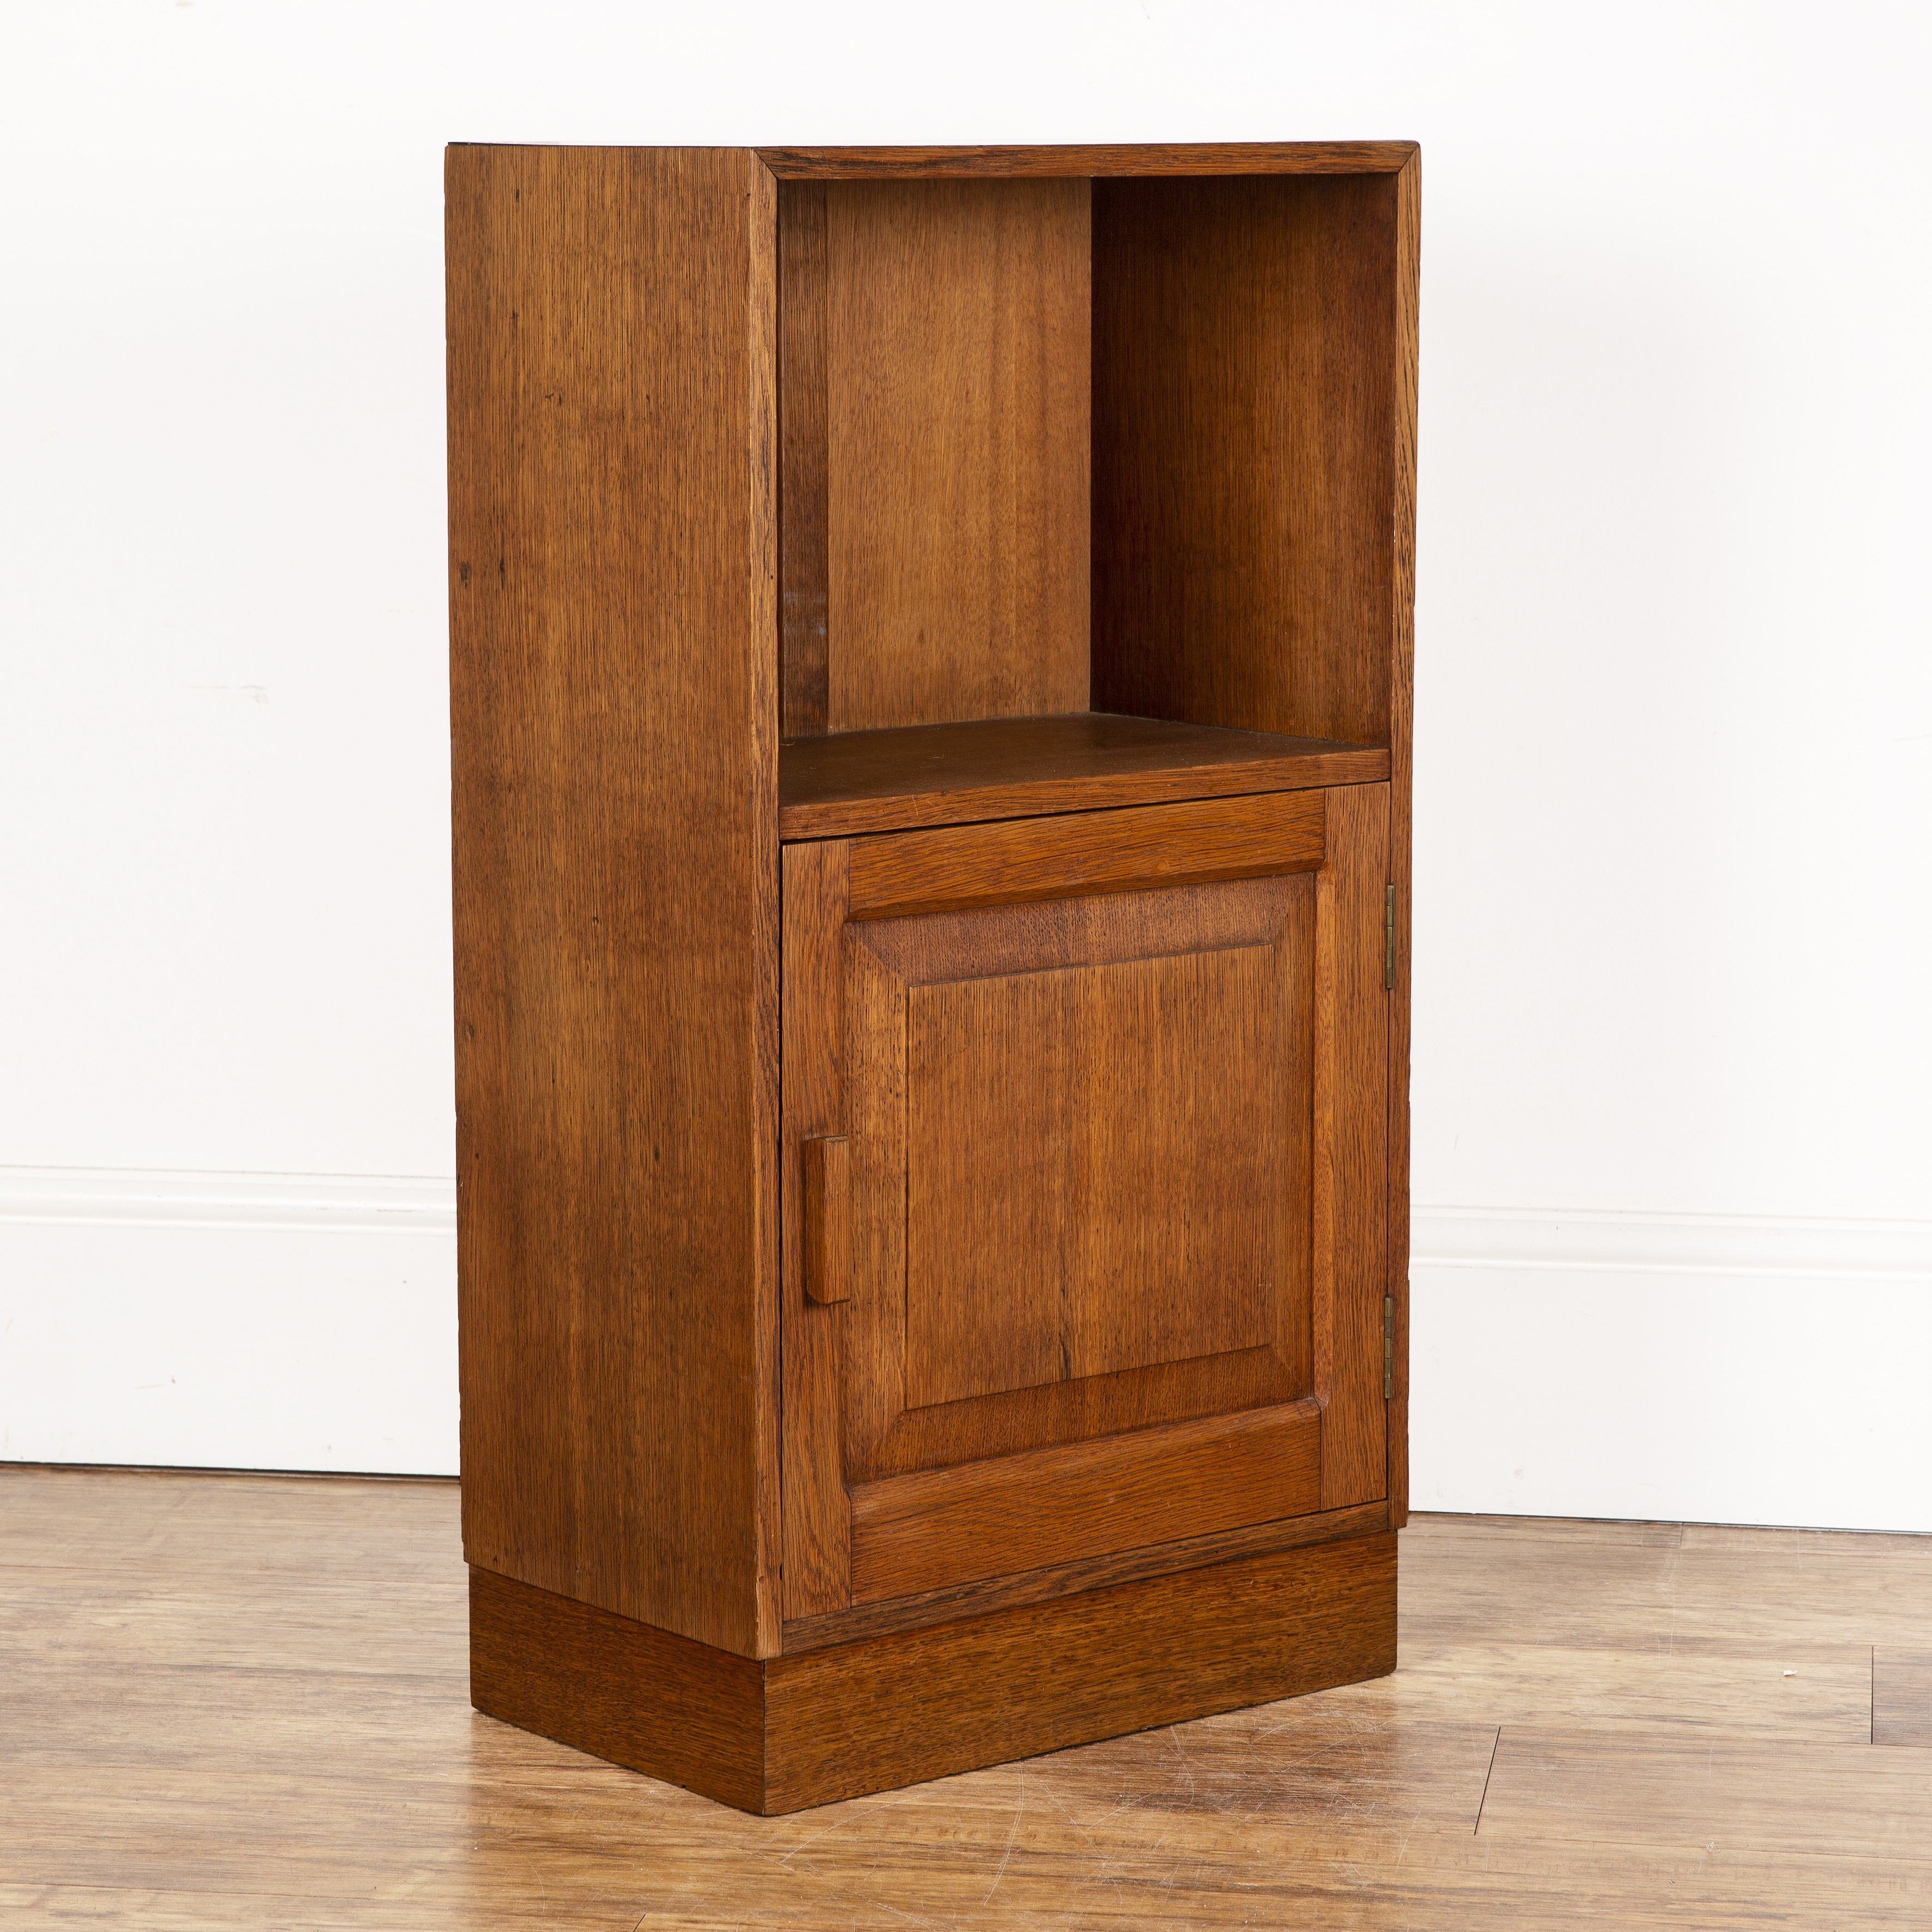 Attributed to Heals oak, small cupboard or bedside table, with open shelf above a fielded panel - Image 3 of 5